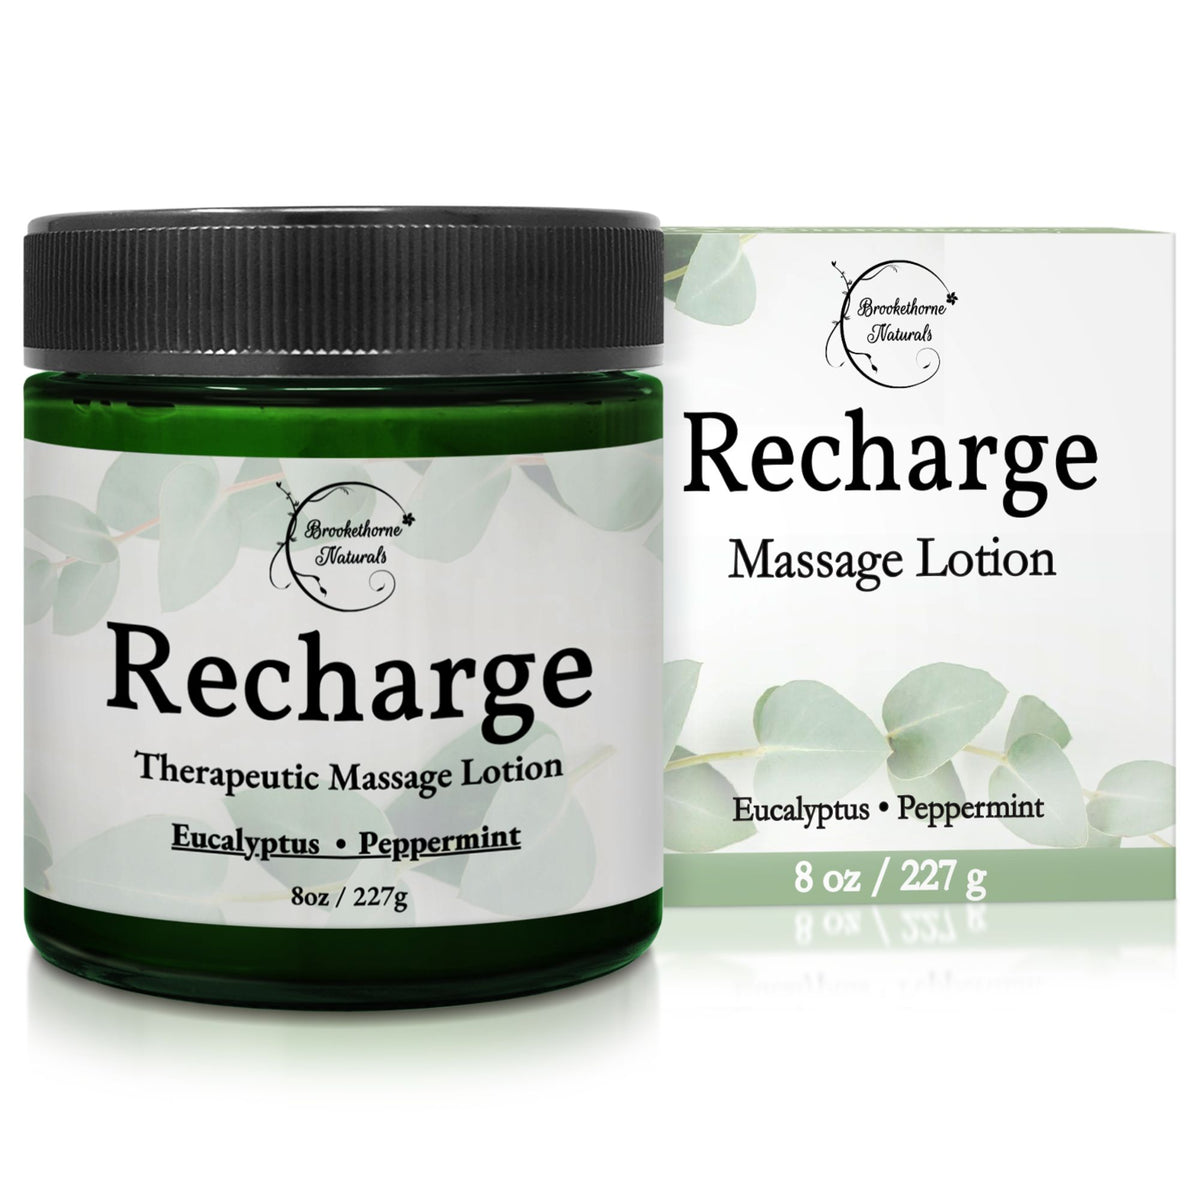 Recharge Therapeutic Massage Lotion